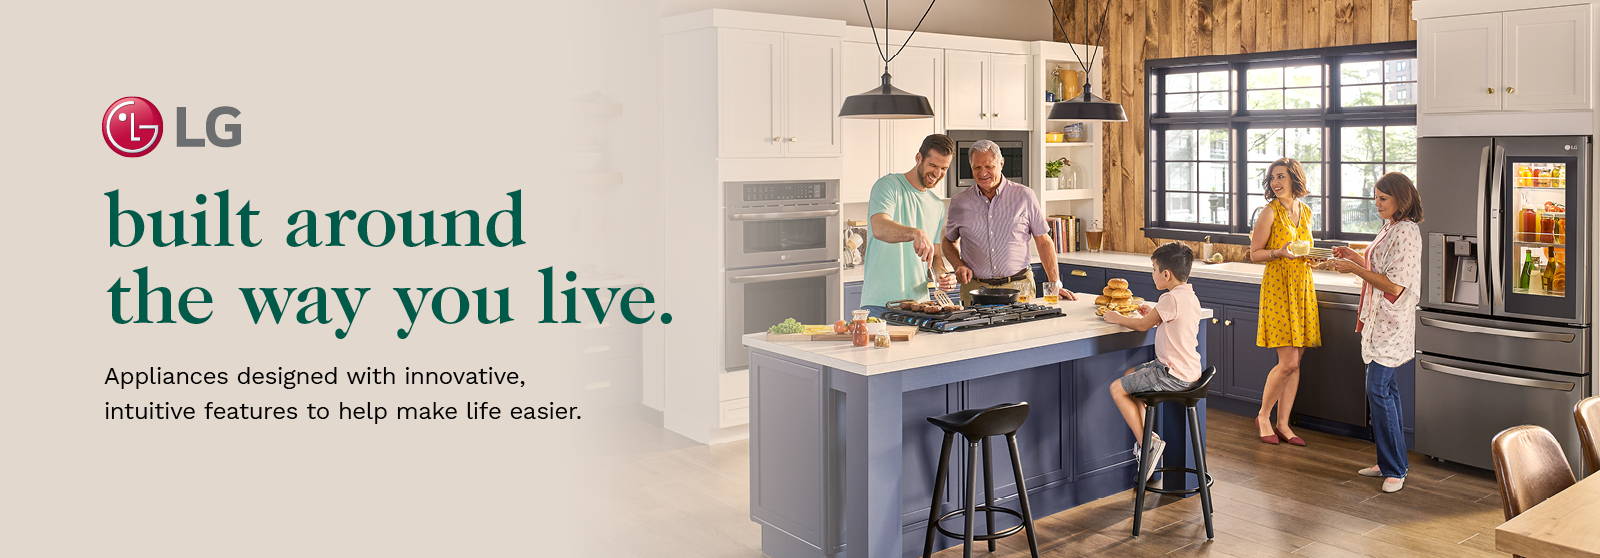 LG | Built Around the Way You Live: Appliances Designed With Innovative, Intuitive Features to Help Make Life Easier | Family Preparing Meal in LG Kitchen Appliances | Dufresne Furniture and Appliances Store  